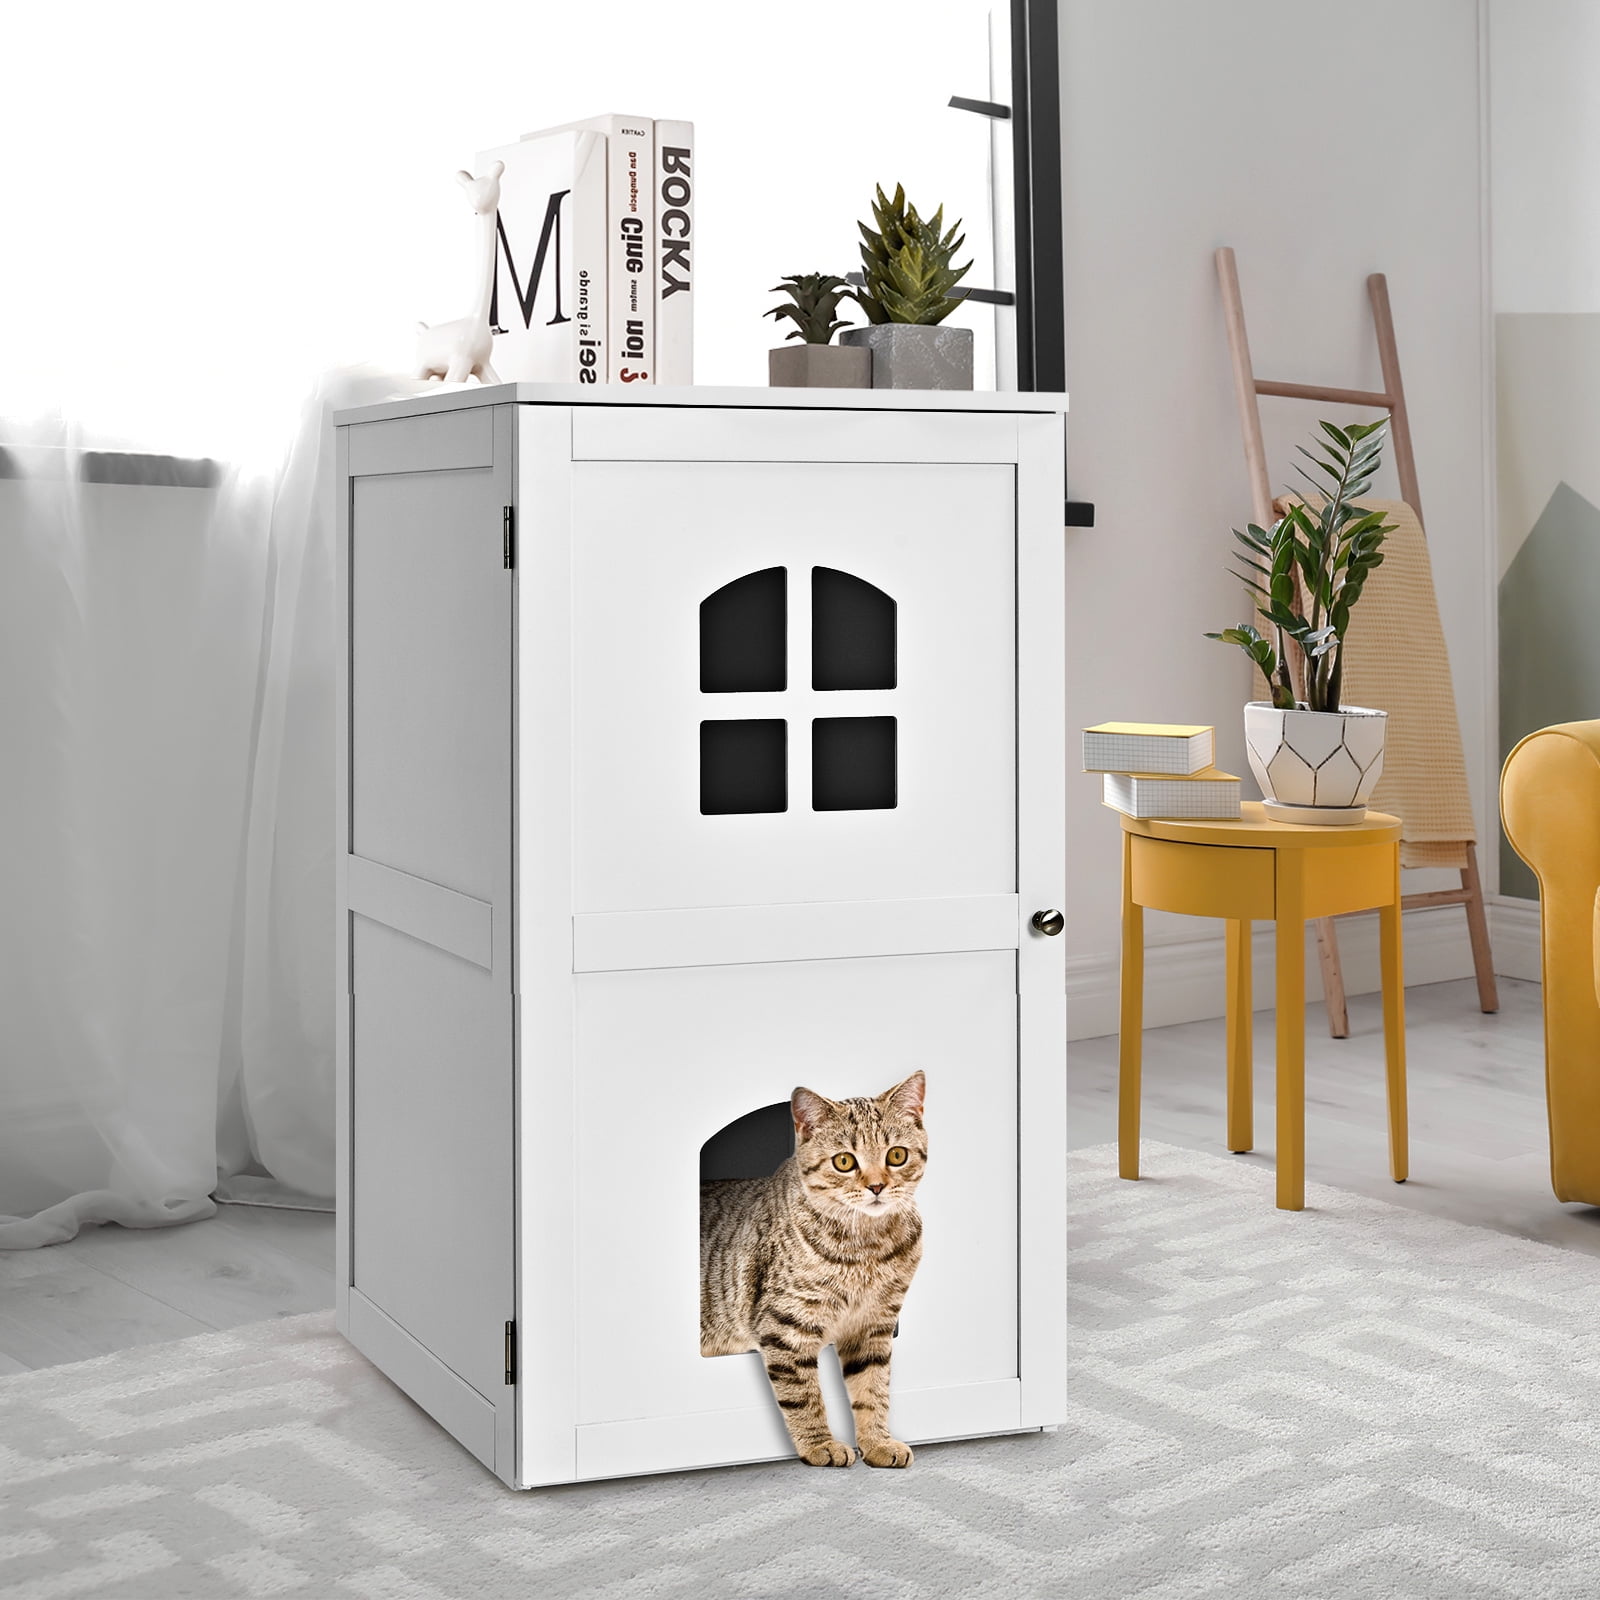 2-Tier Functional Wood Cat Washroom Litter Box Cover with Multiple Vents a Round Entrance and Openable Door